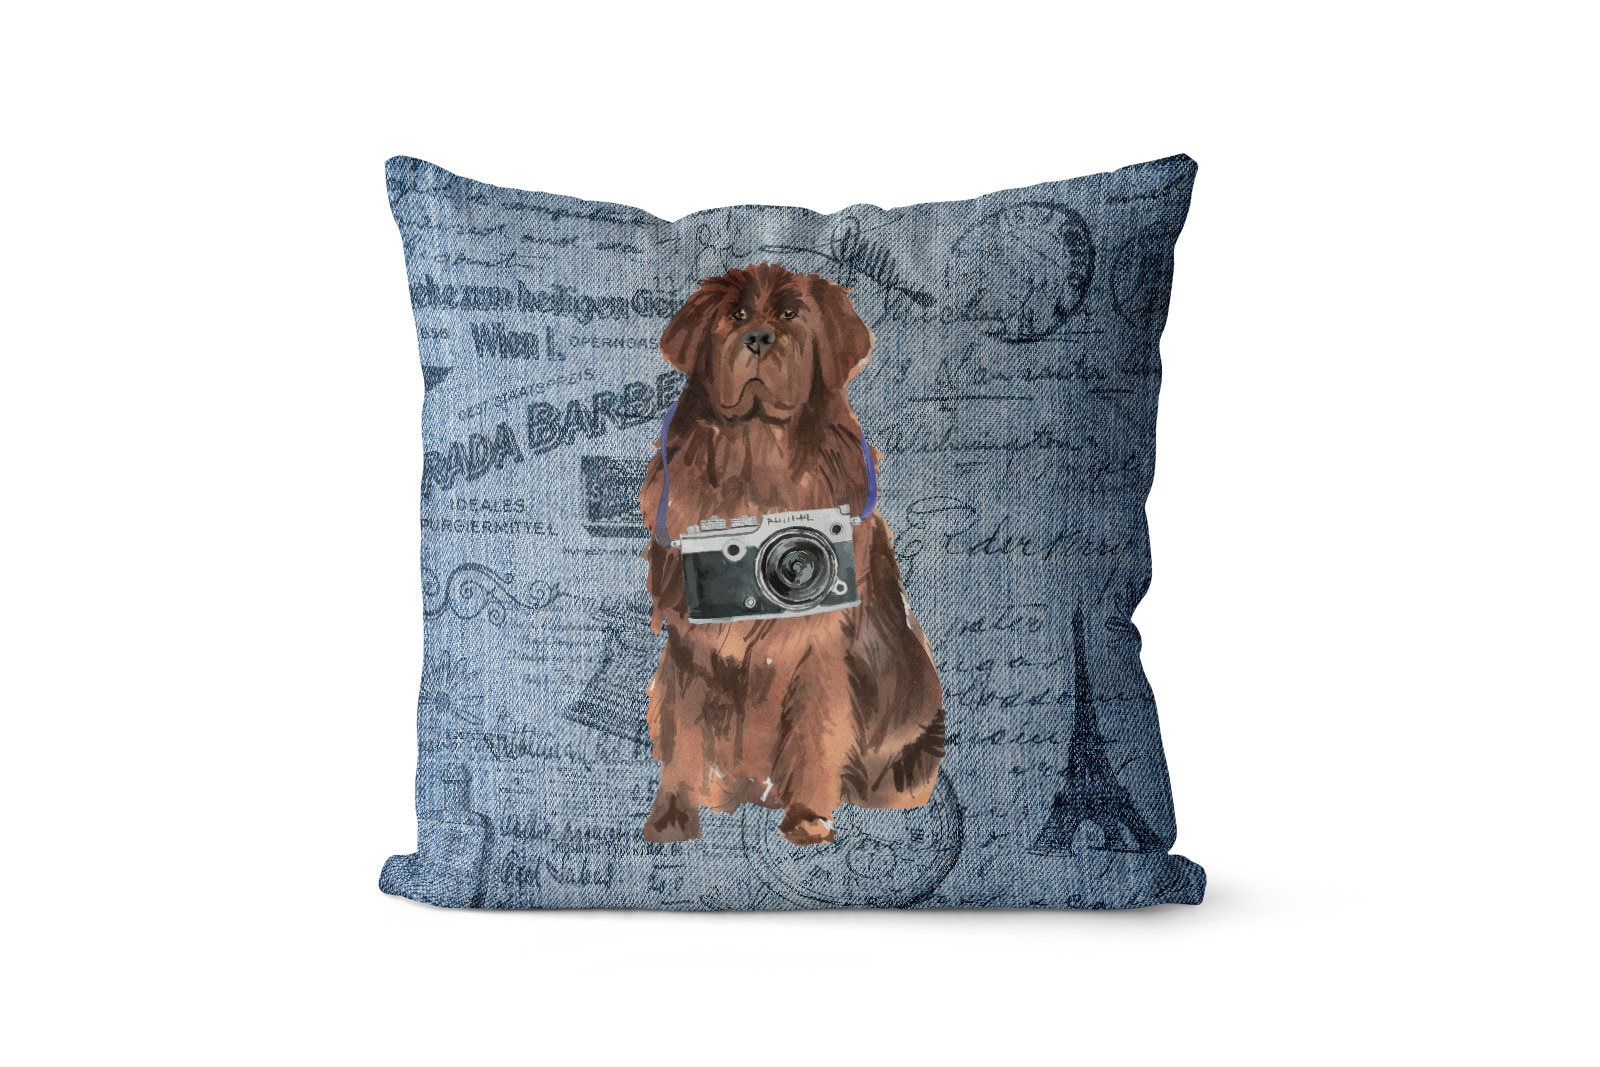 Newfoundland Dog Inspired Throw Pillow - Large Denim Style Cushion With Filling Available in Linen Or Velour. Travel Collection